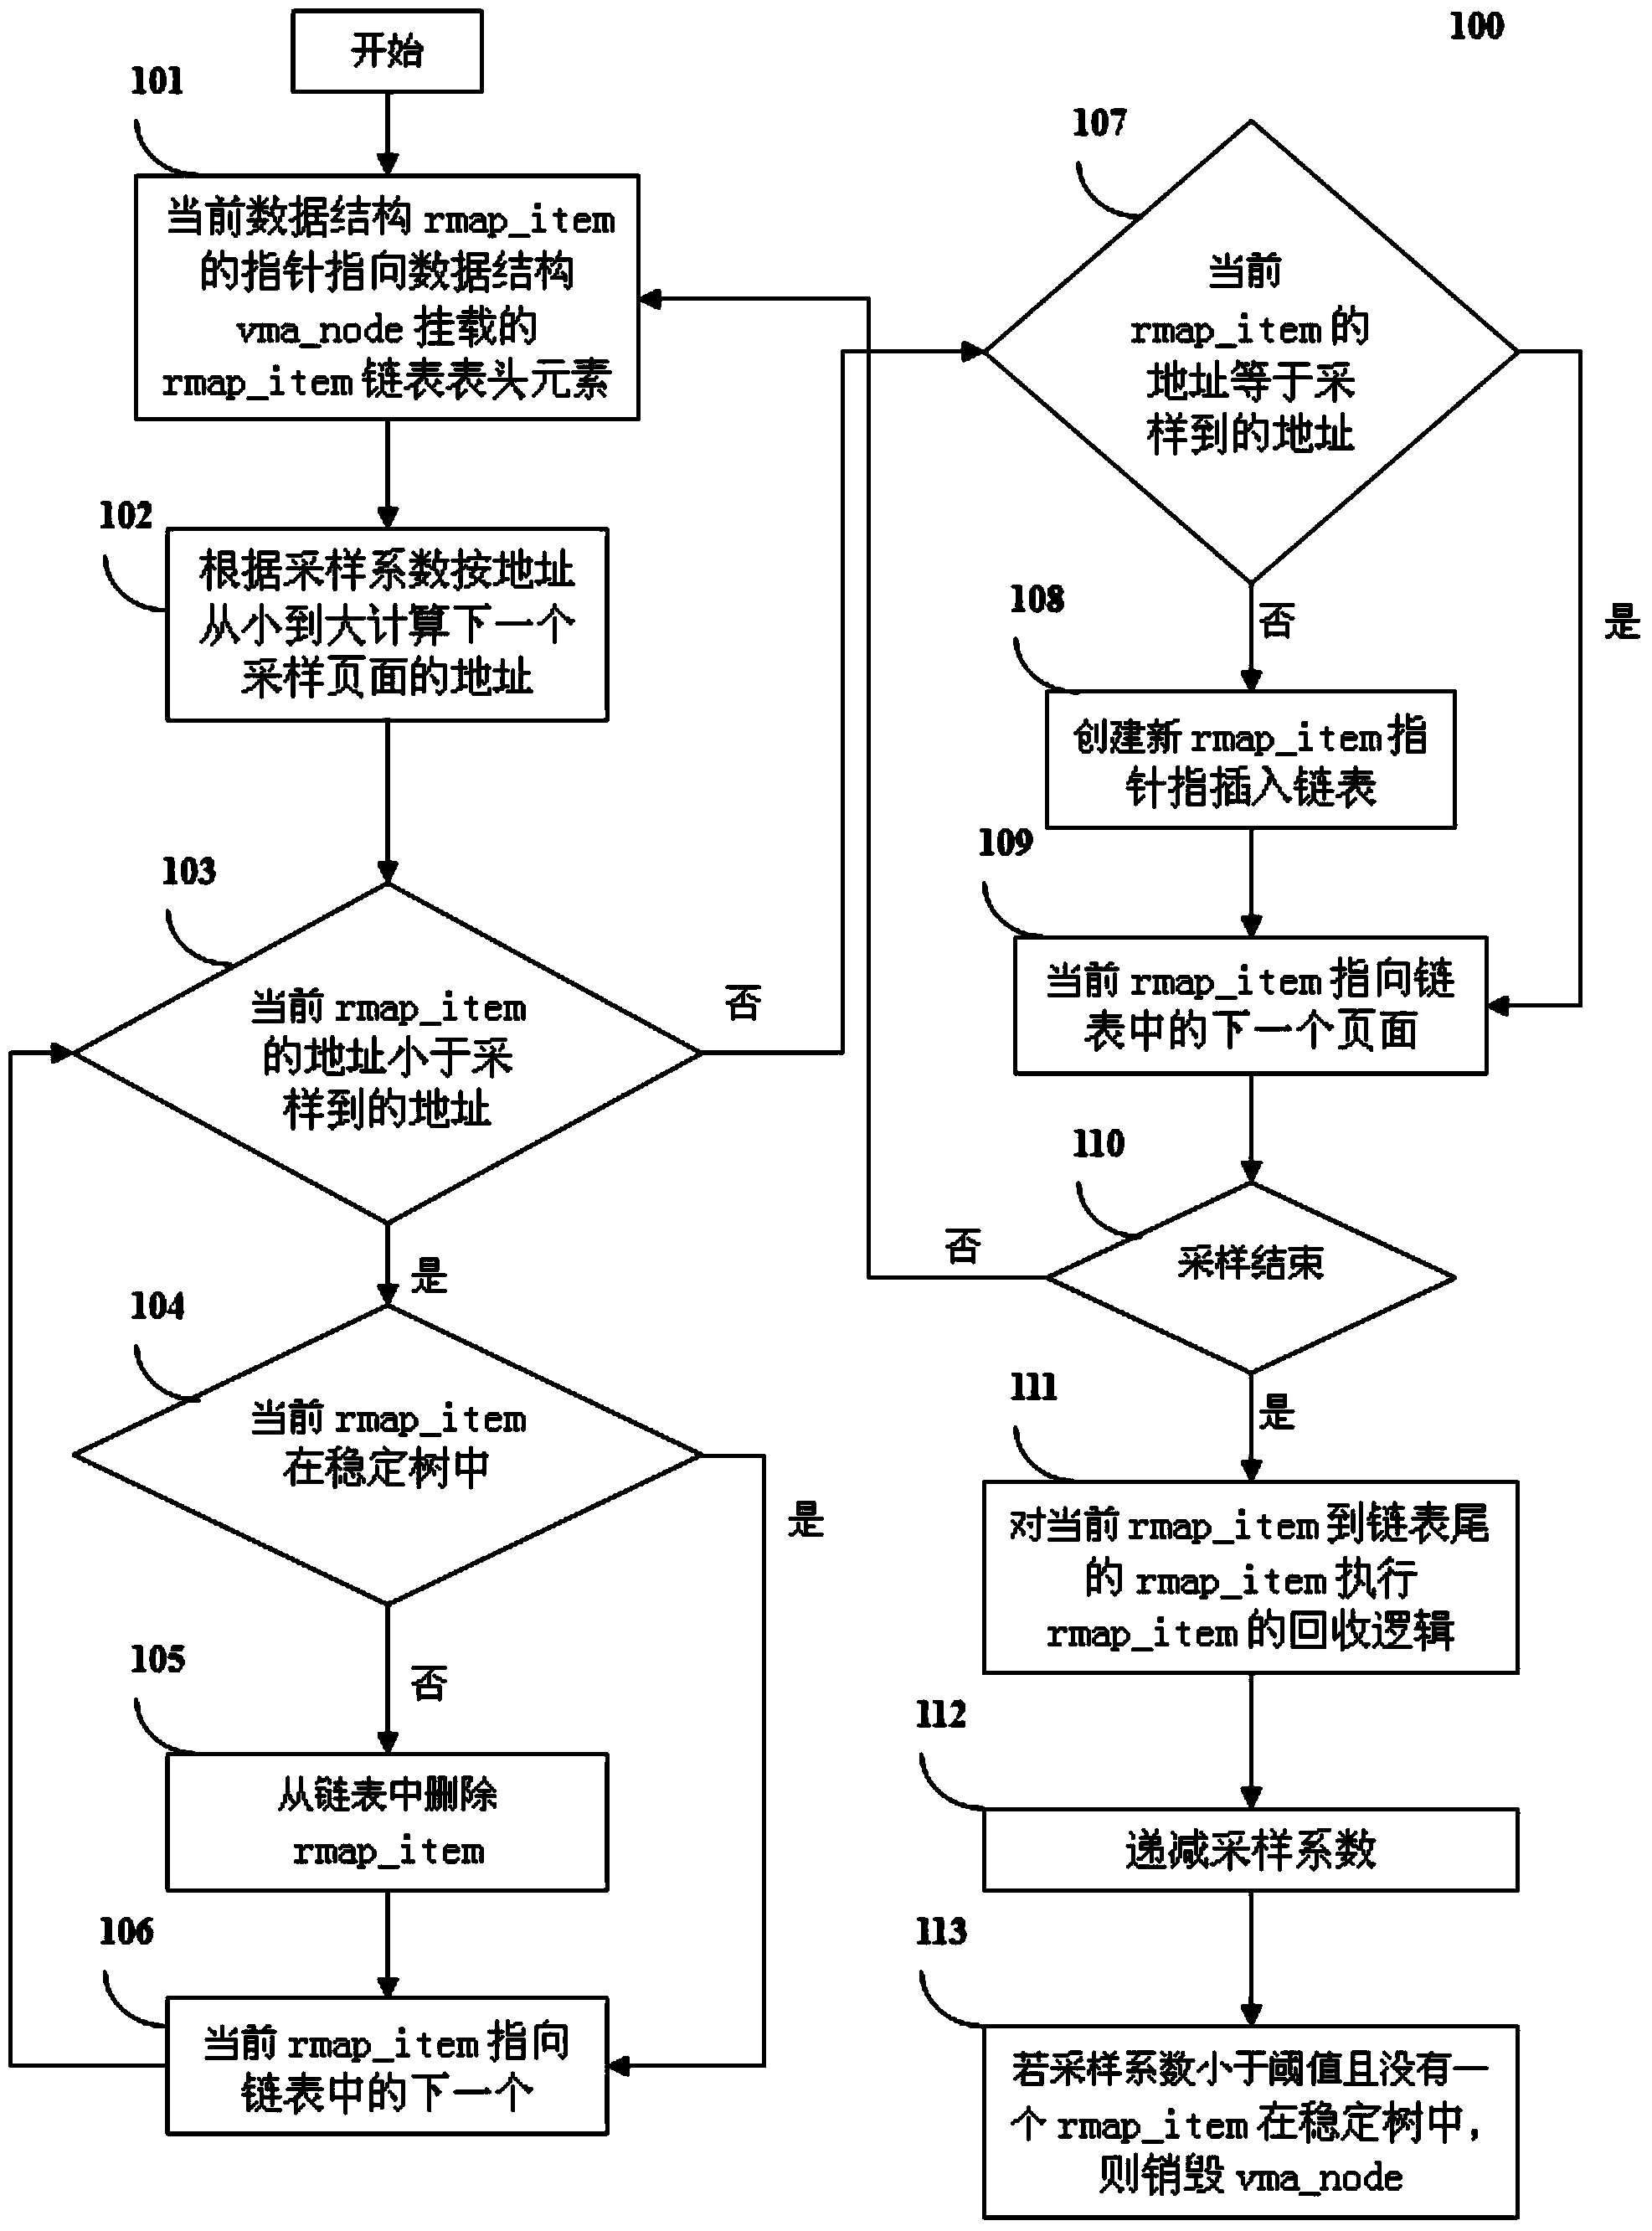 Low-cost efficient internal storage redundancy removing method and system